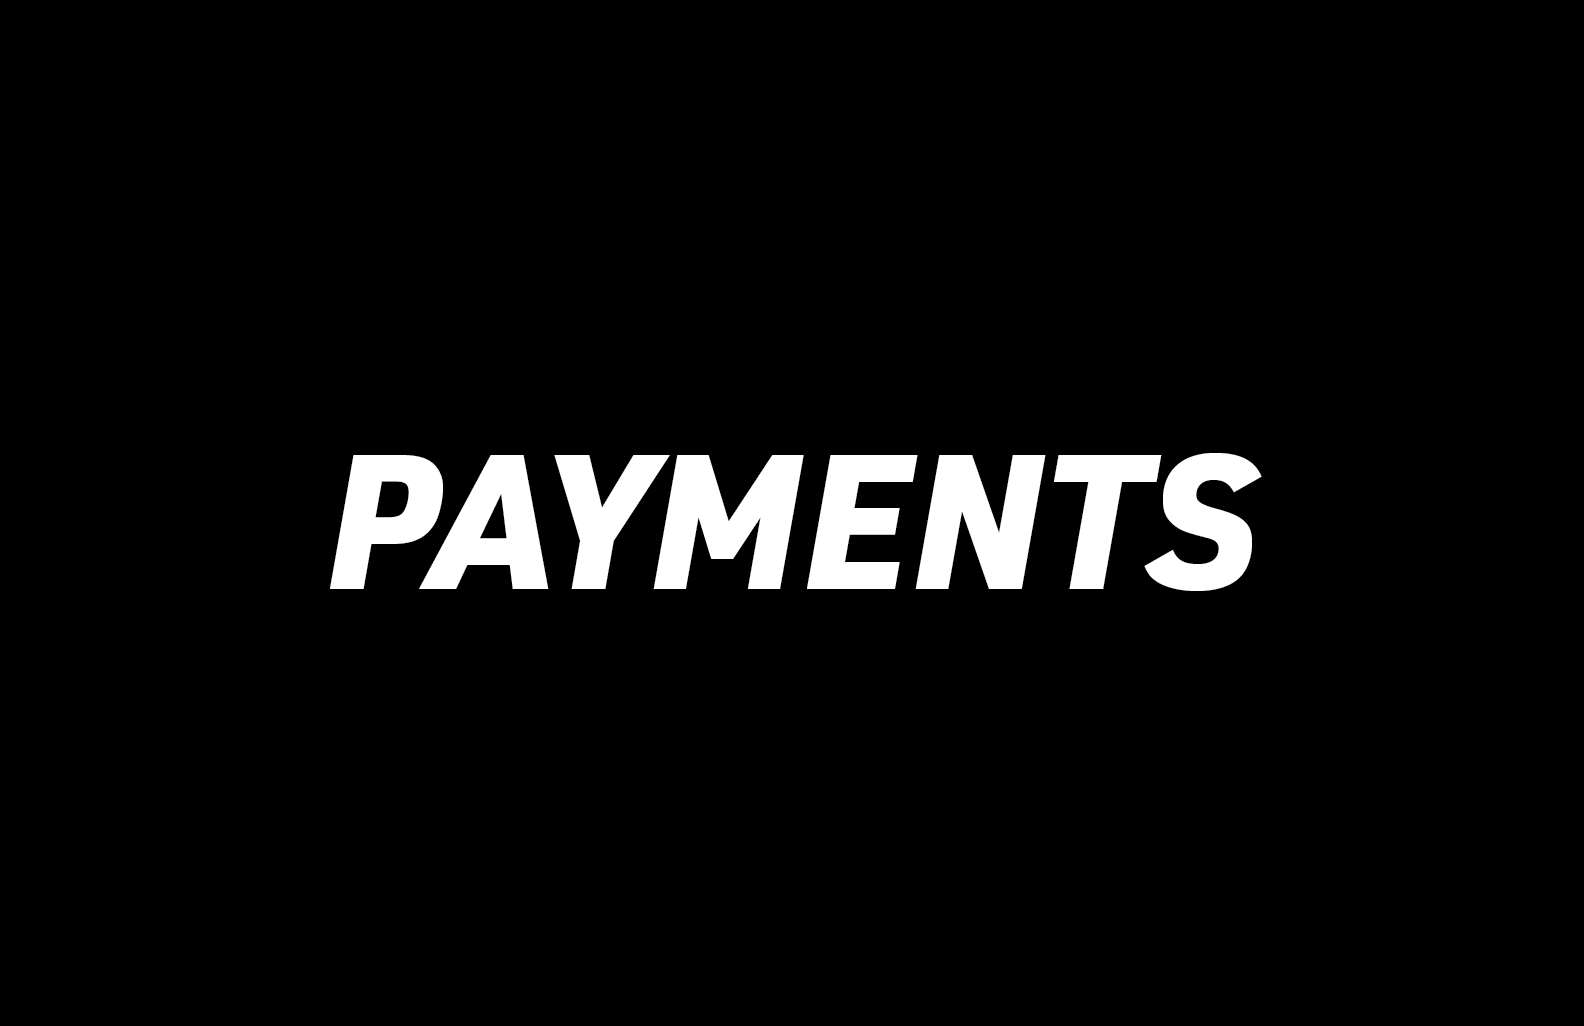 Payments-01.png